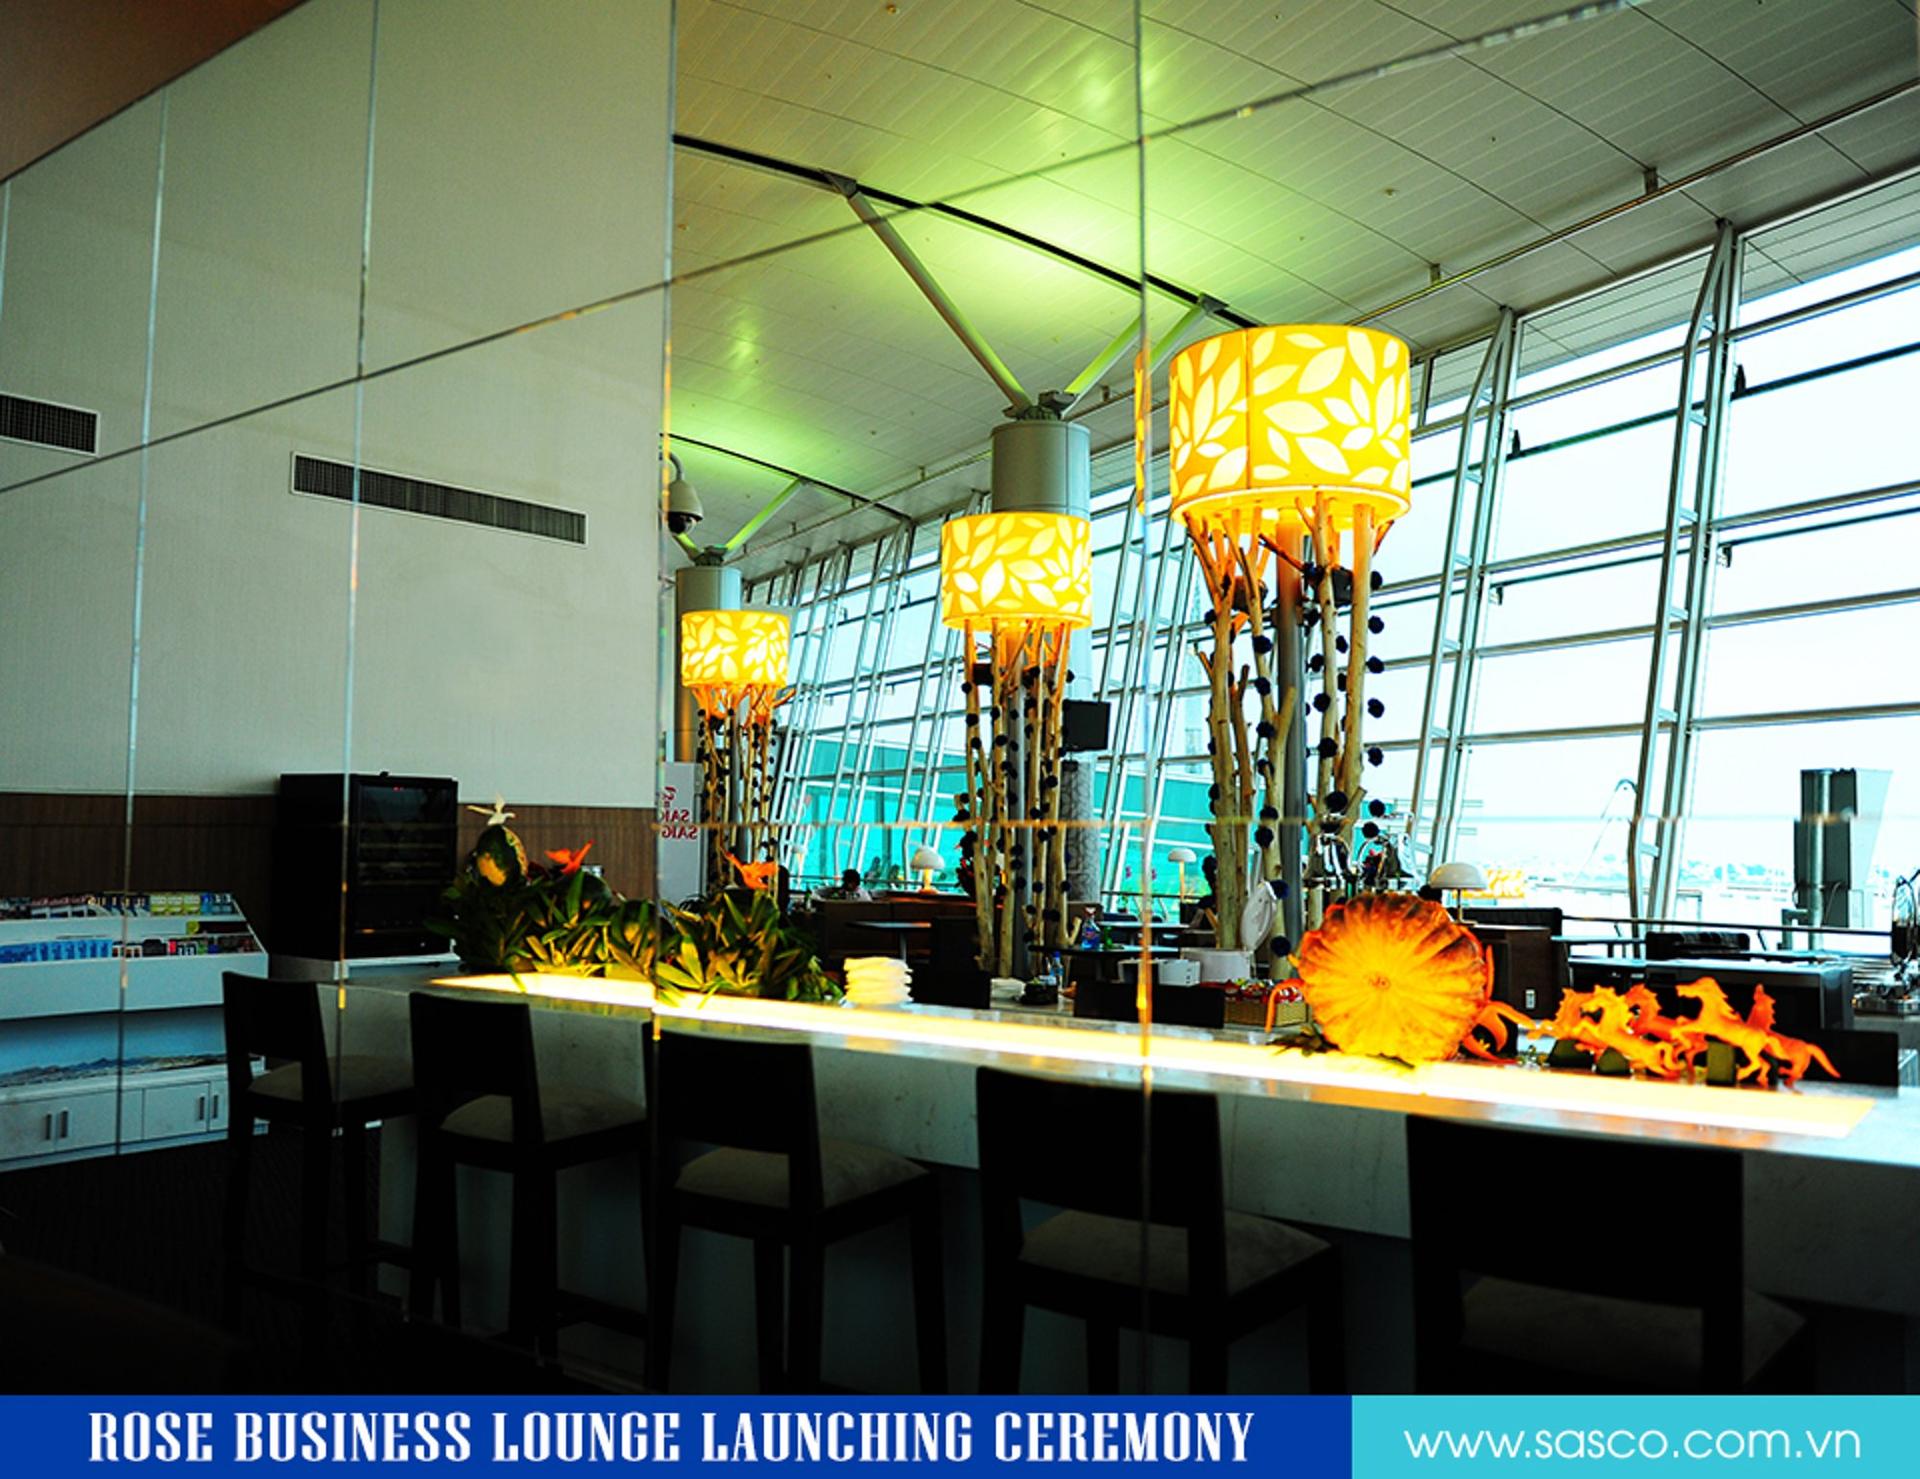 Rose Business Lounge image 26 of 26